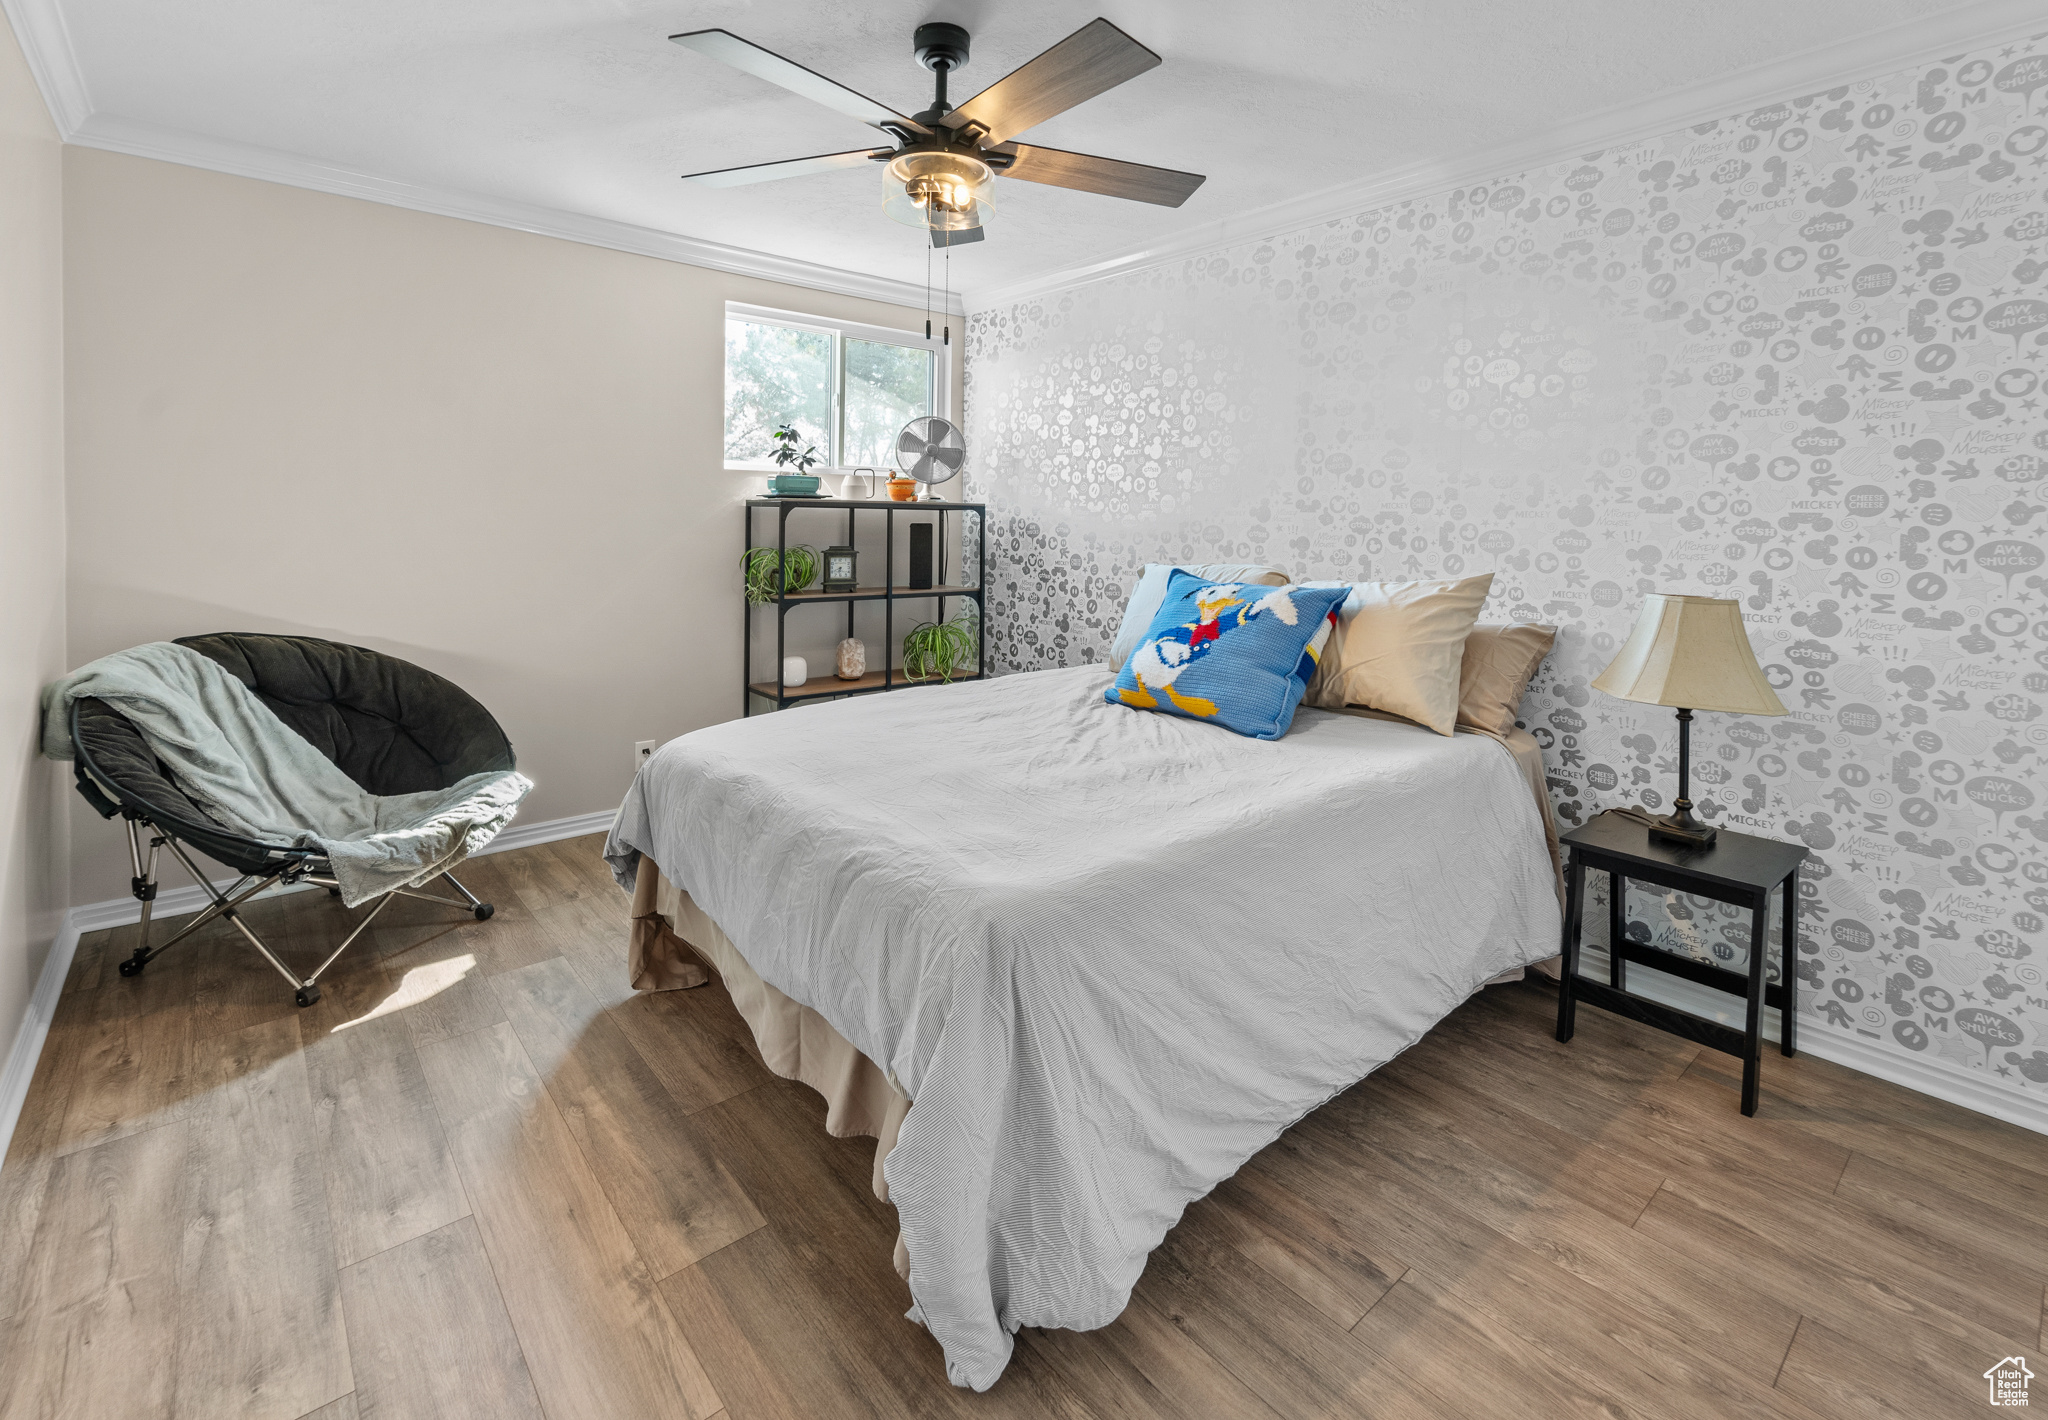 Large bedroom with ceiling fan, ornamental molding, super cute Disney style!